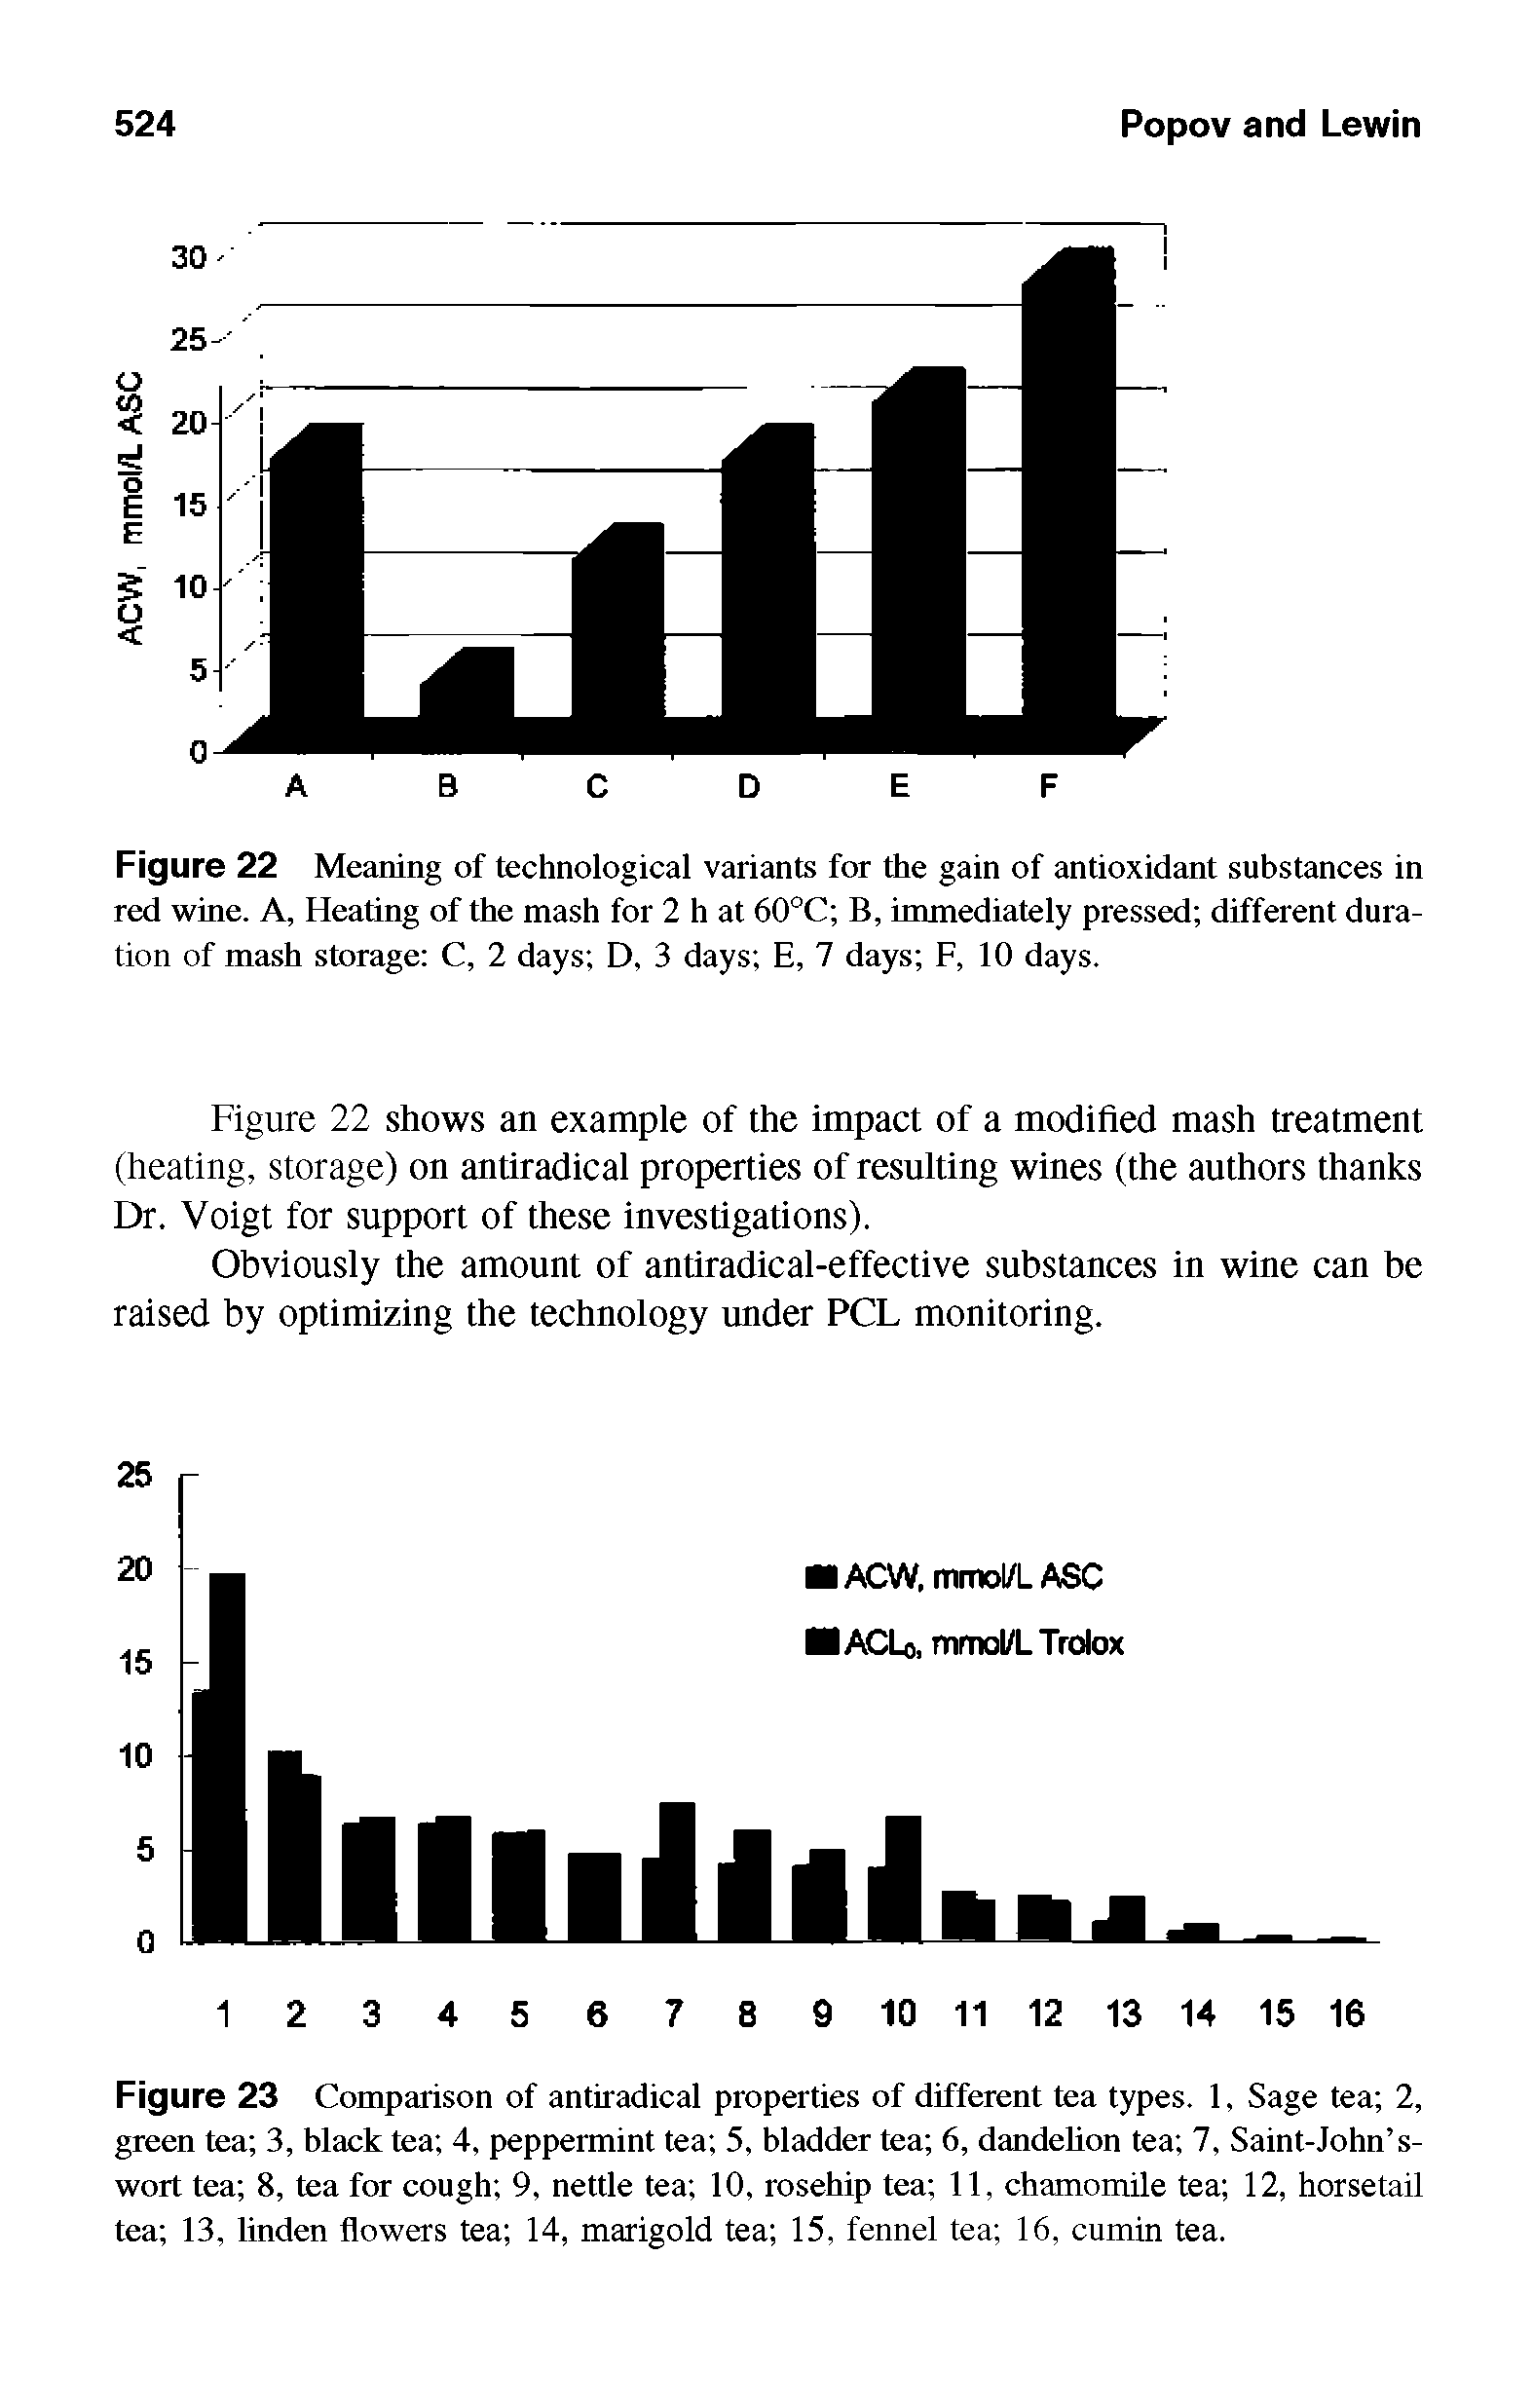 Figure 22 Meaning of technological variants for the gain of antioxidant substances in red wine. A, Heating of the mash for 2 h at 60°C B, immediately pressed different duration of mash storage C, 2 days D, 3 days E, 7 days F, 10 days.